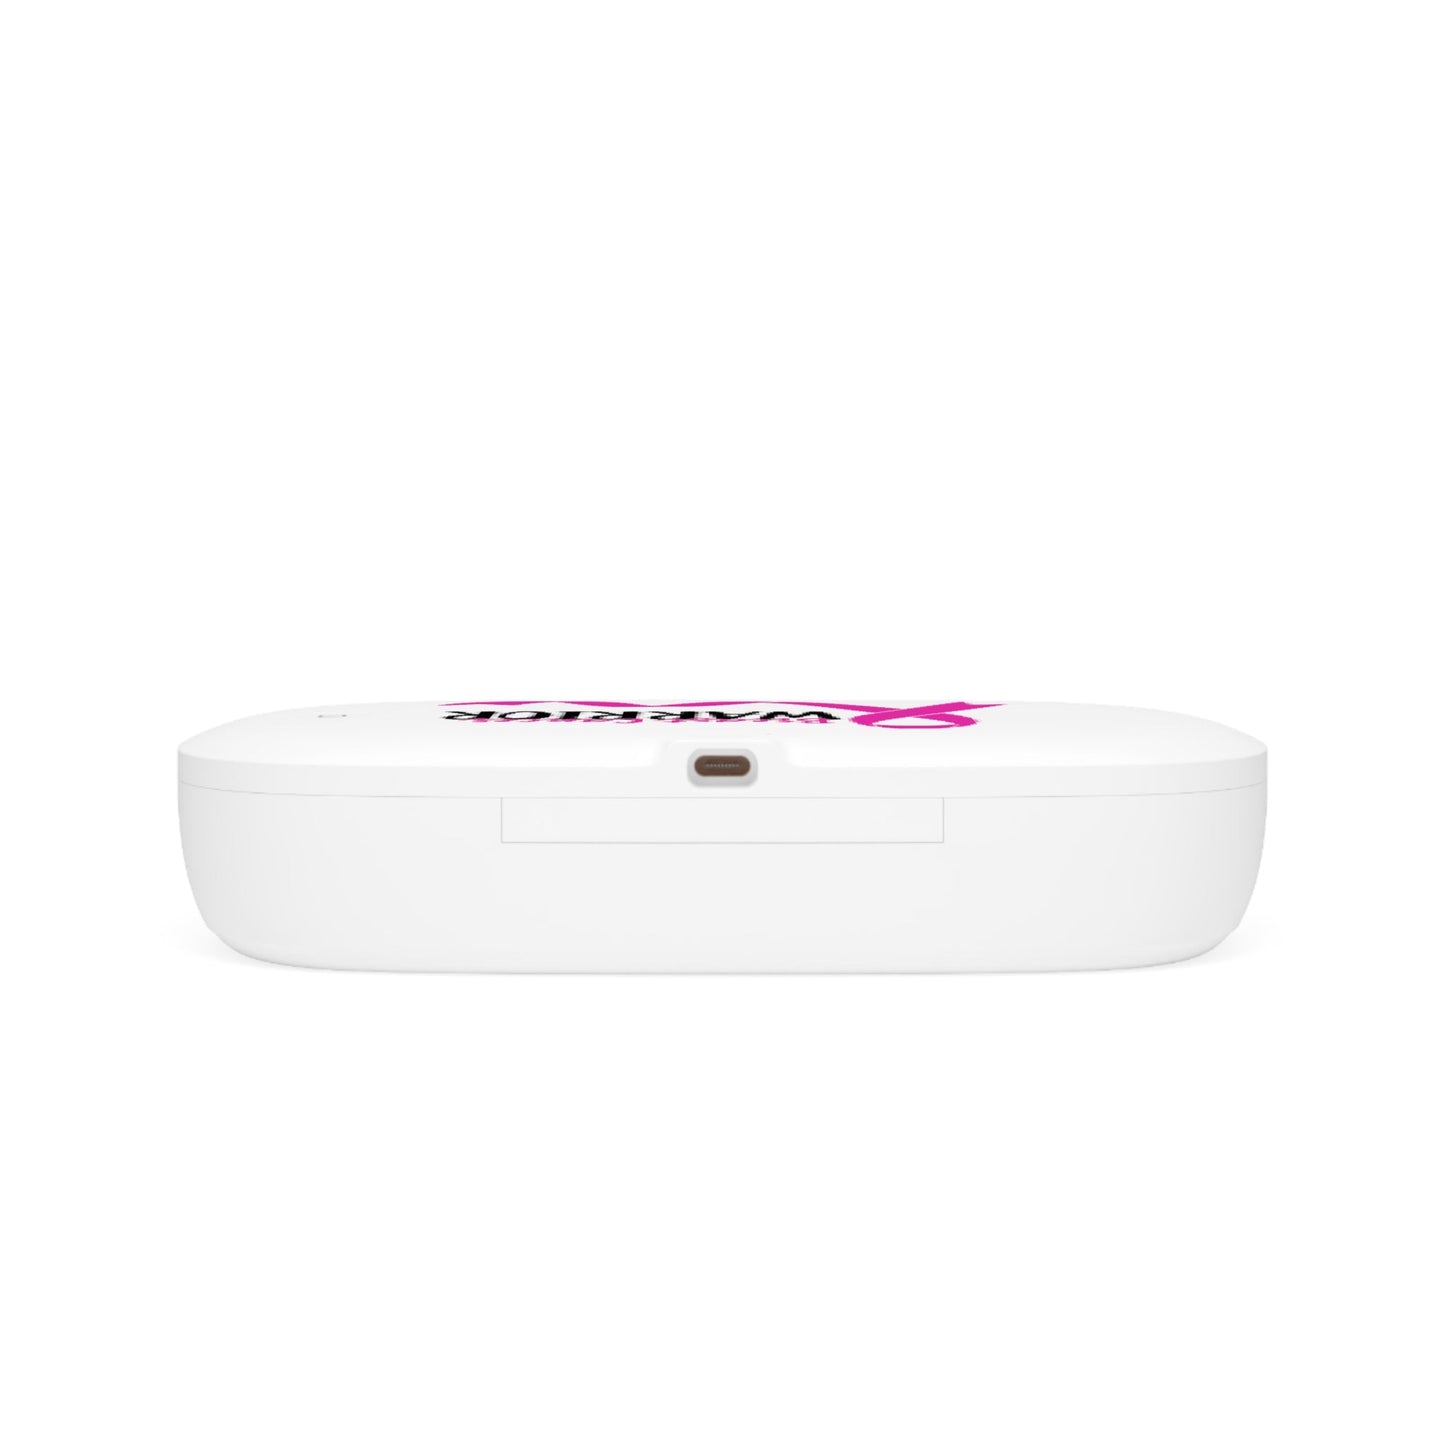 Breast Cancer Warrior UV Phone Sanitizer and Wireless Charging Pad